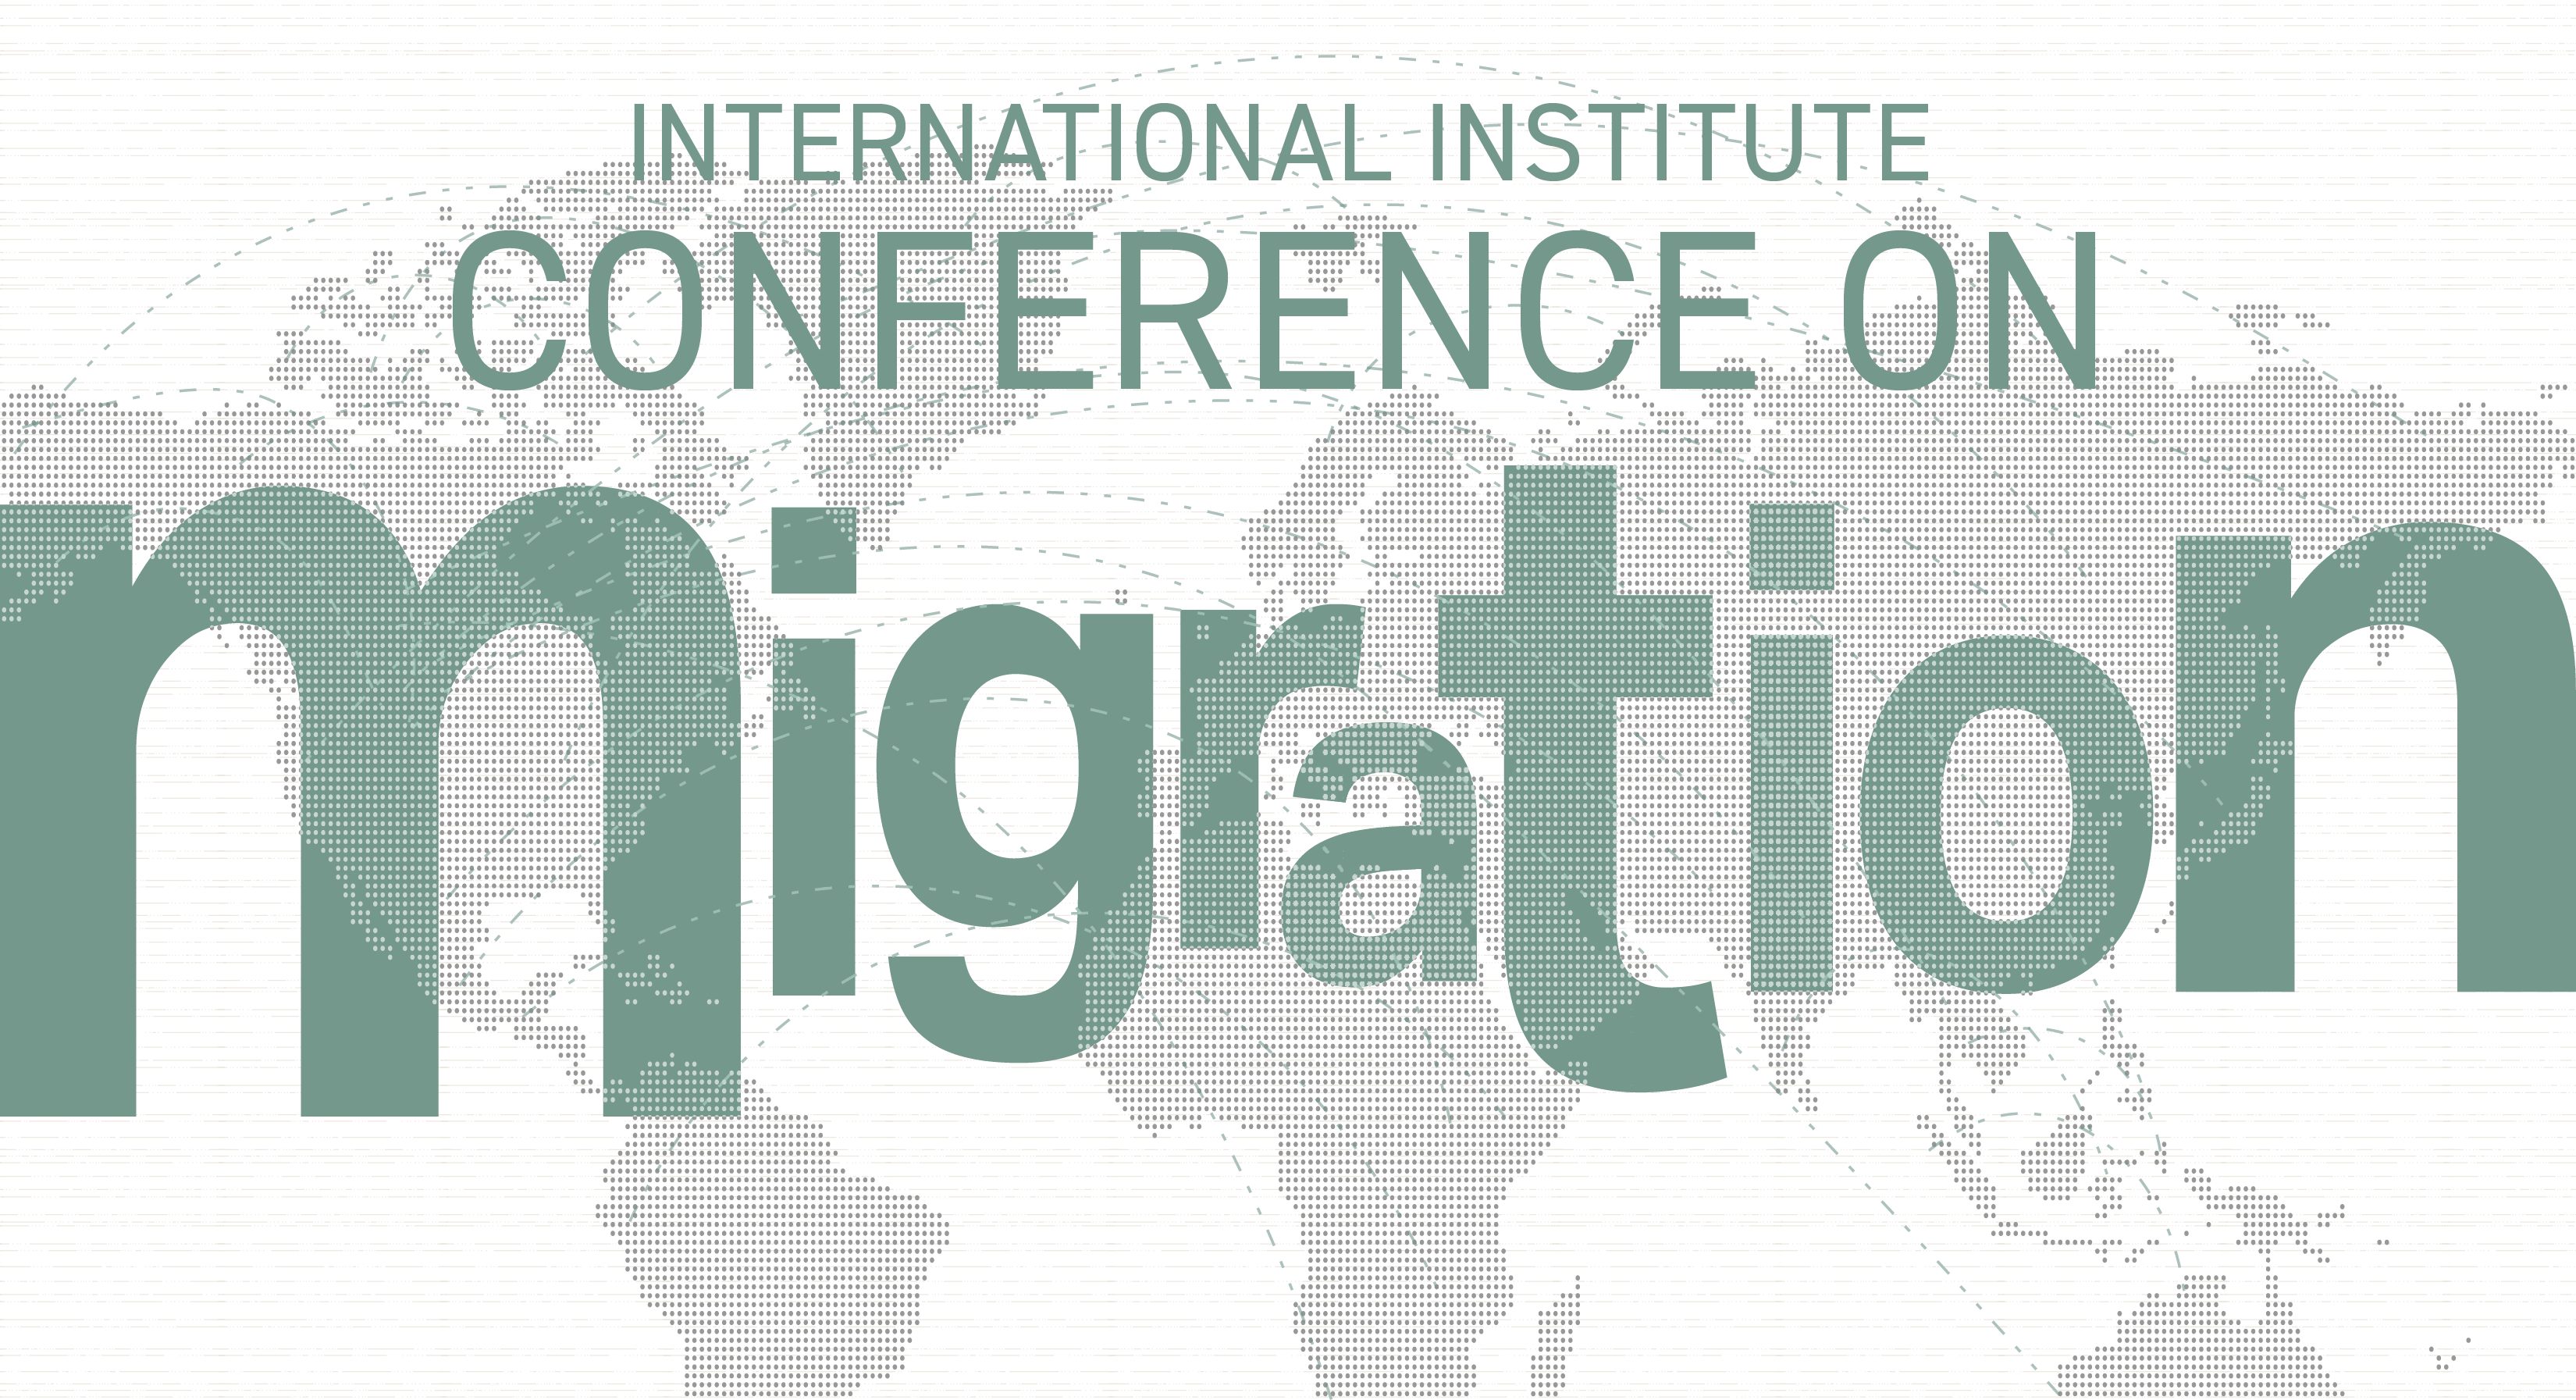 International Institute Conference on Migration banner. Presented by the International Institute area studies centers: African Studies Center, Armenian Studies Program, Center for Middle Eastern and North African Studies, Center for South Asian Studies, Center for Southeast Asian Studies, Center for Latin American and Caribbean Studies, Global Islamic Studies Center, Lieberthal-Rogel Center for Chinese Studies, Nam Center for Korean Studies, Weiser Center for Emerging Democracies